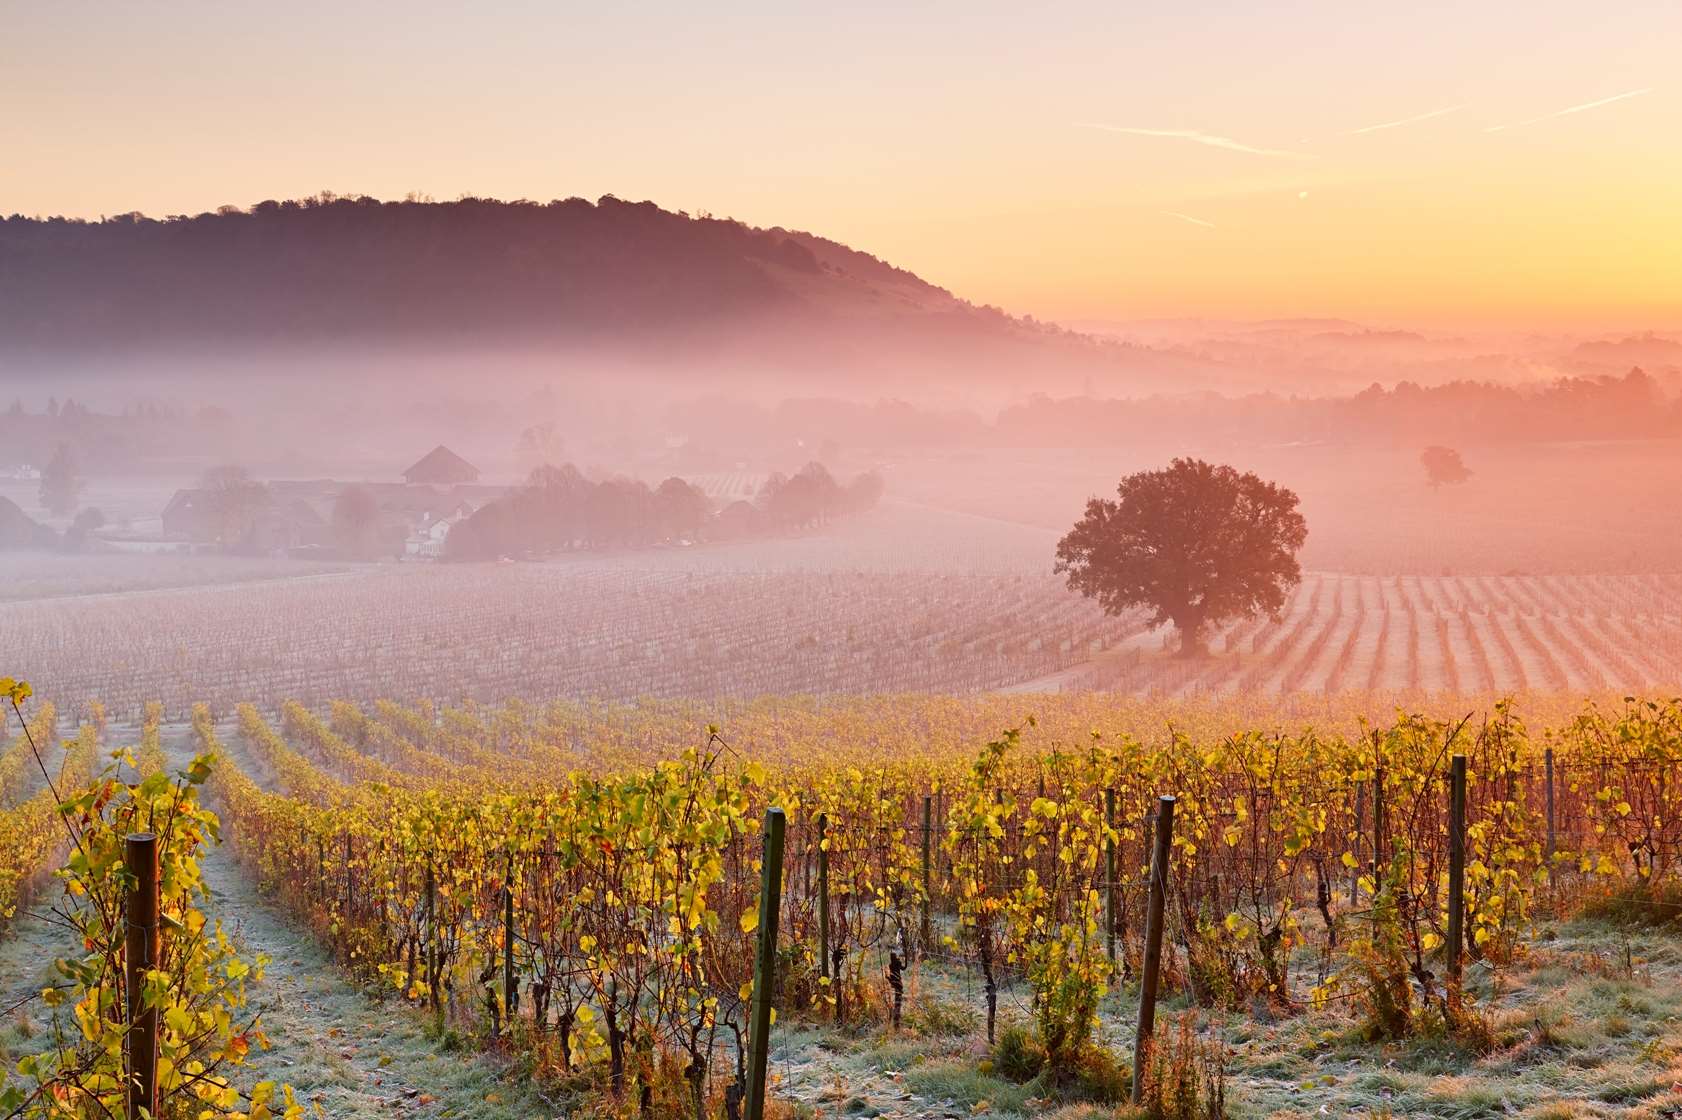 In a good vintage, Denbies can produce over 400,000 bottles of red, white, rose and sparkling wine, accounting for roughly 10% of total UK wine production.